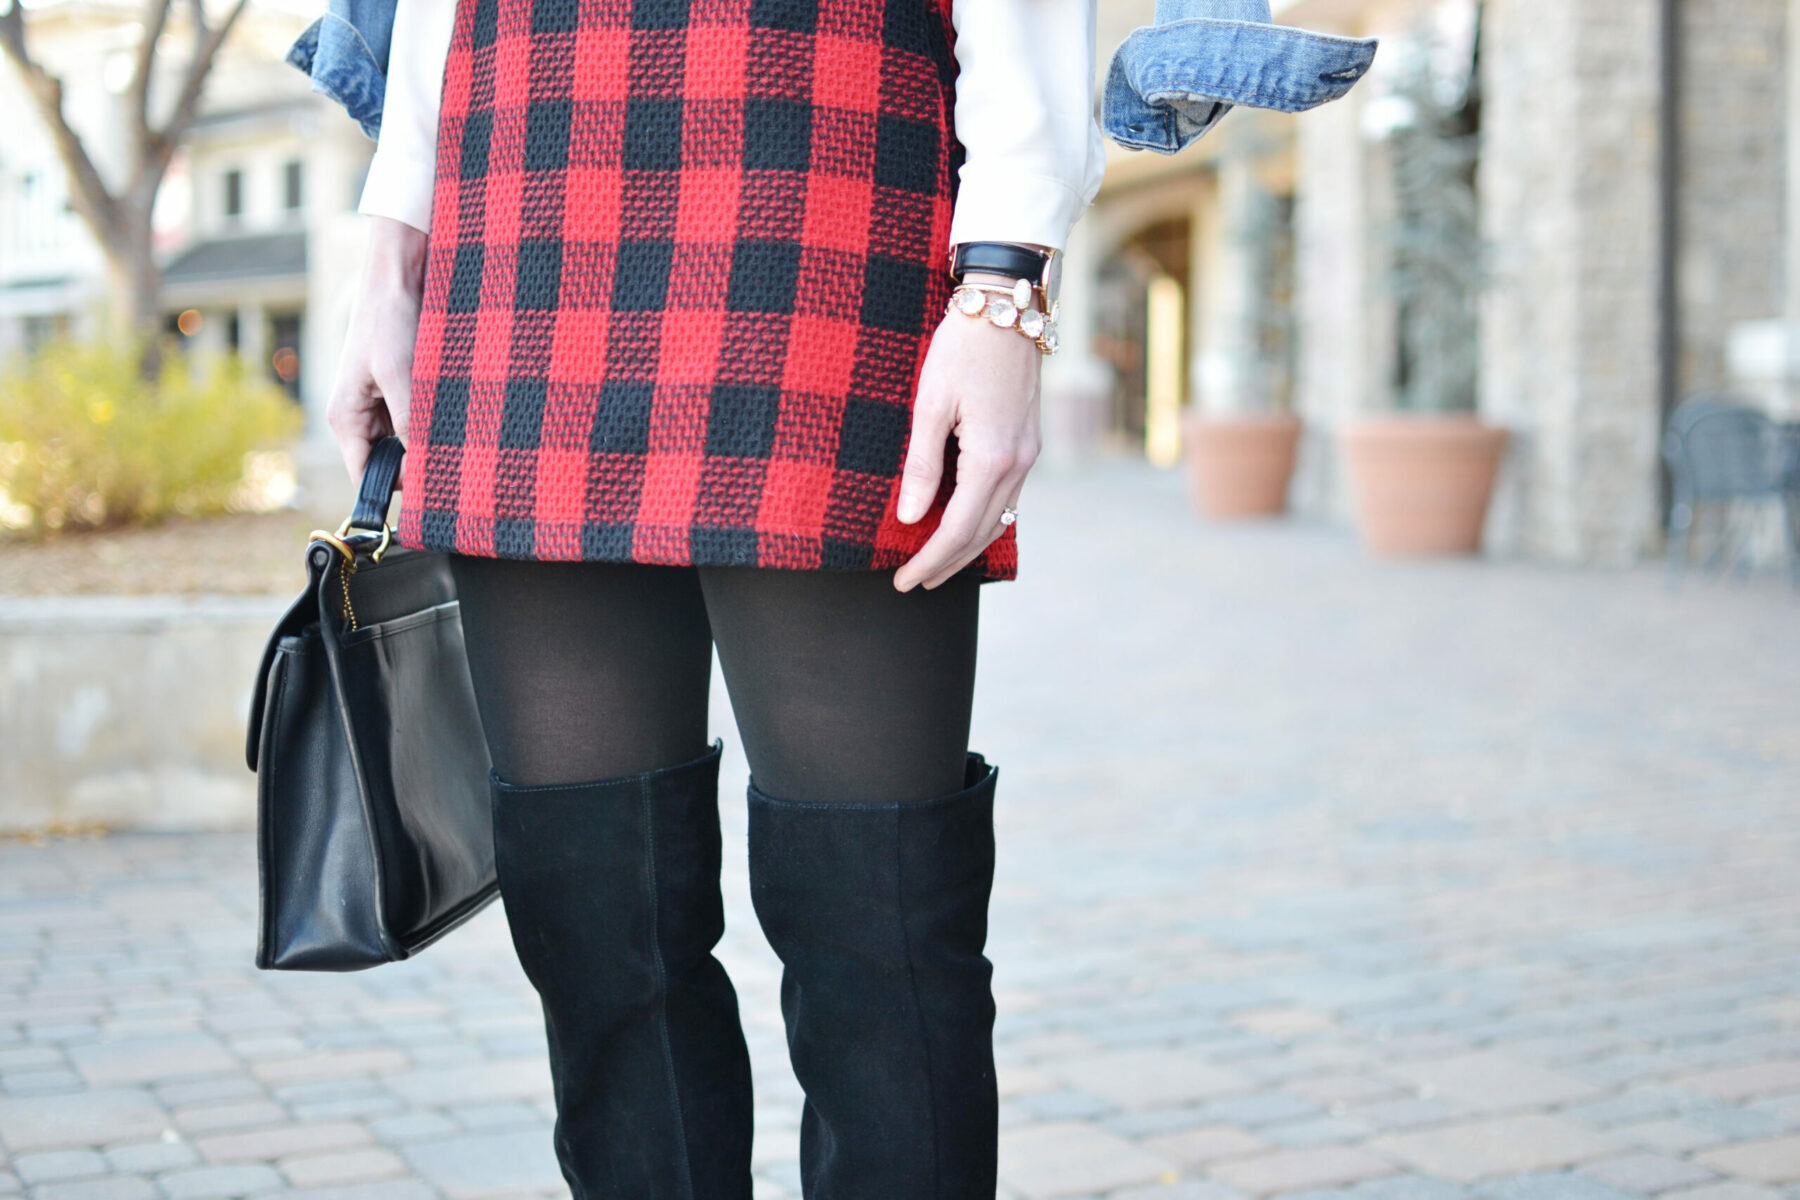 The red blouse, leather skirt and black patterned tights - Fashion